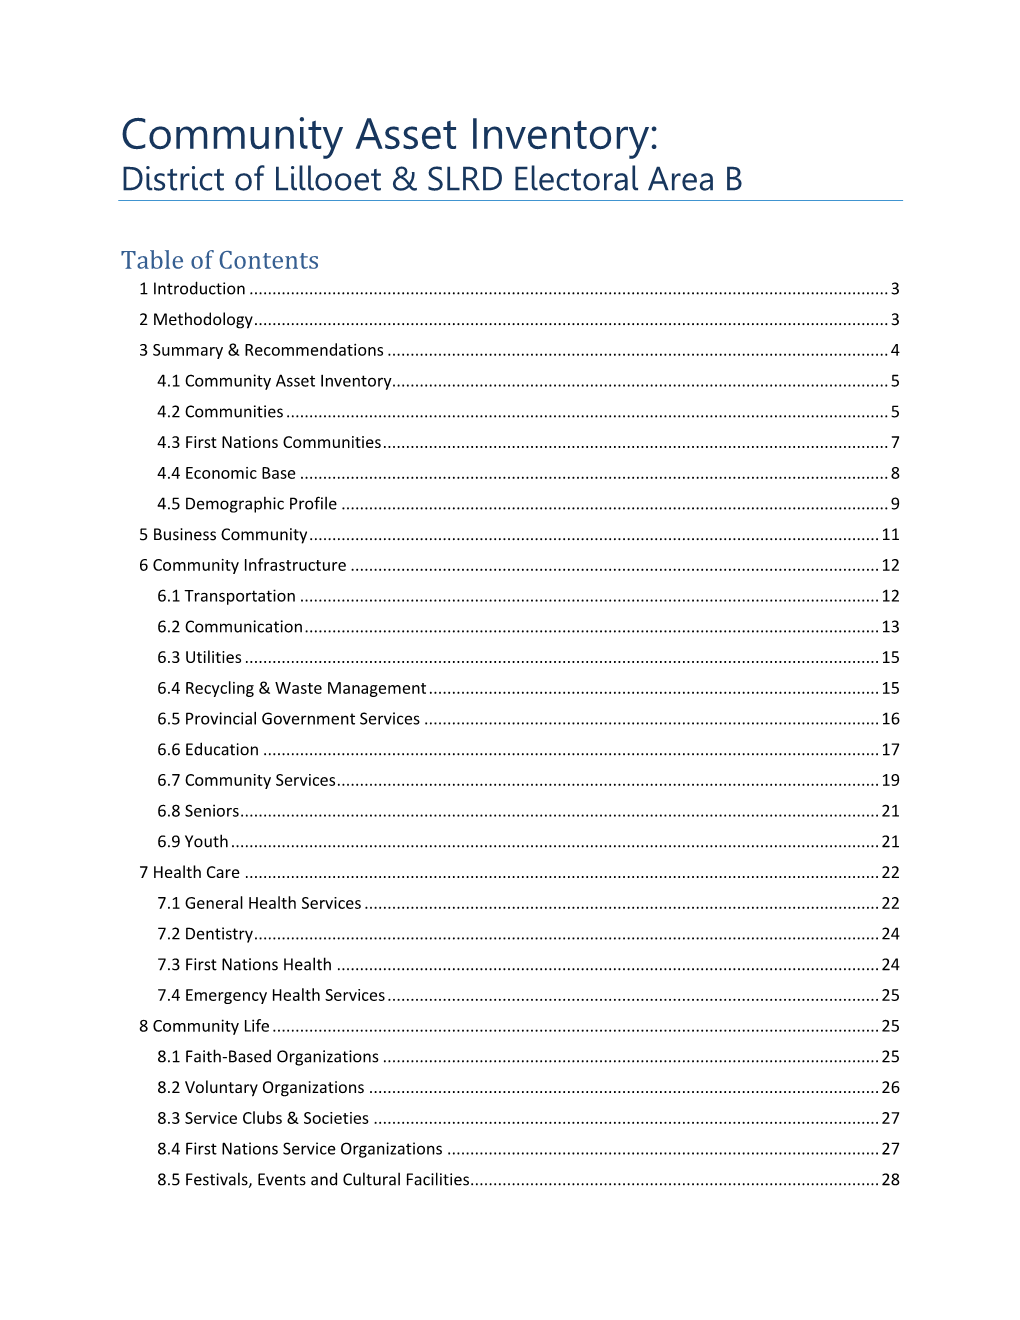 District of Lillooet & SLRD Electoral Area B Community Asset Inventory